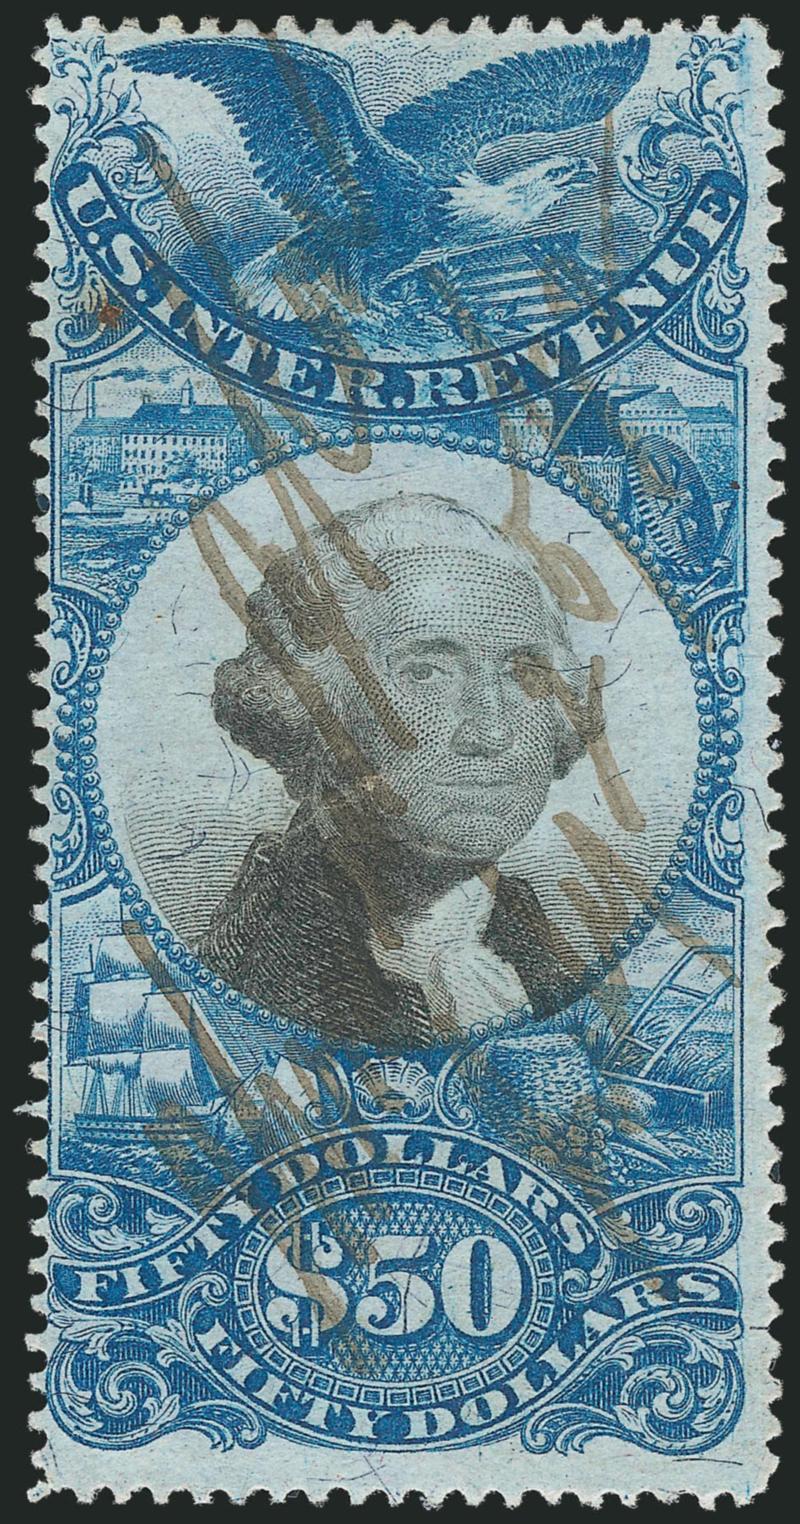 $10.00-$50.00 Second Issue Revenues (R128-R131).> Rich colors, neat ms. cancels, couple minor flaws, Fine-Very Fine appearance